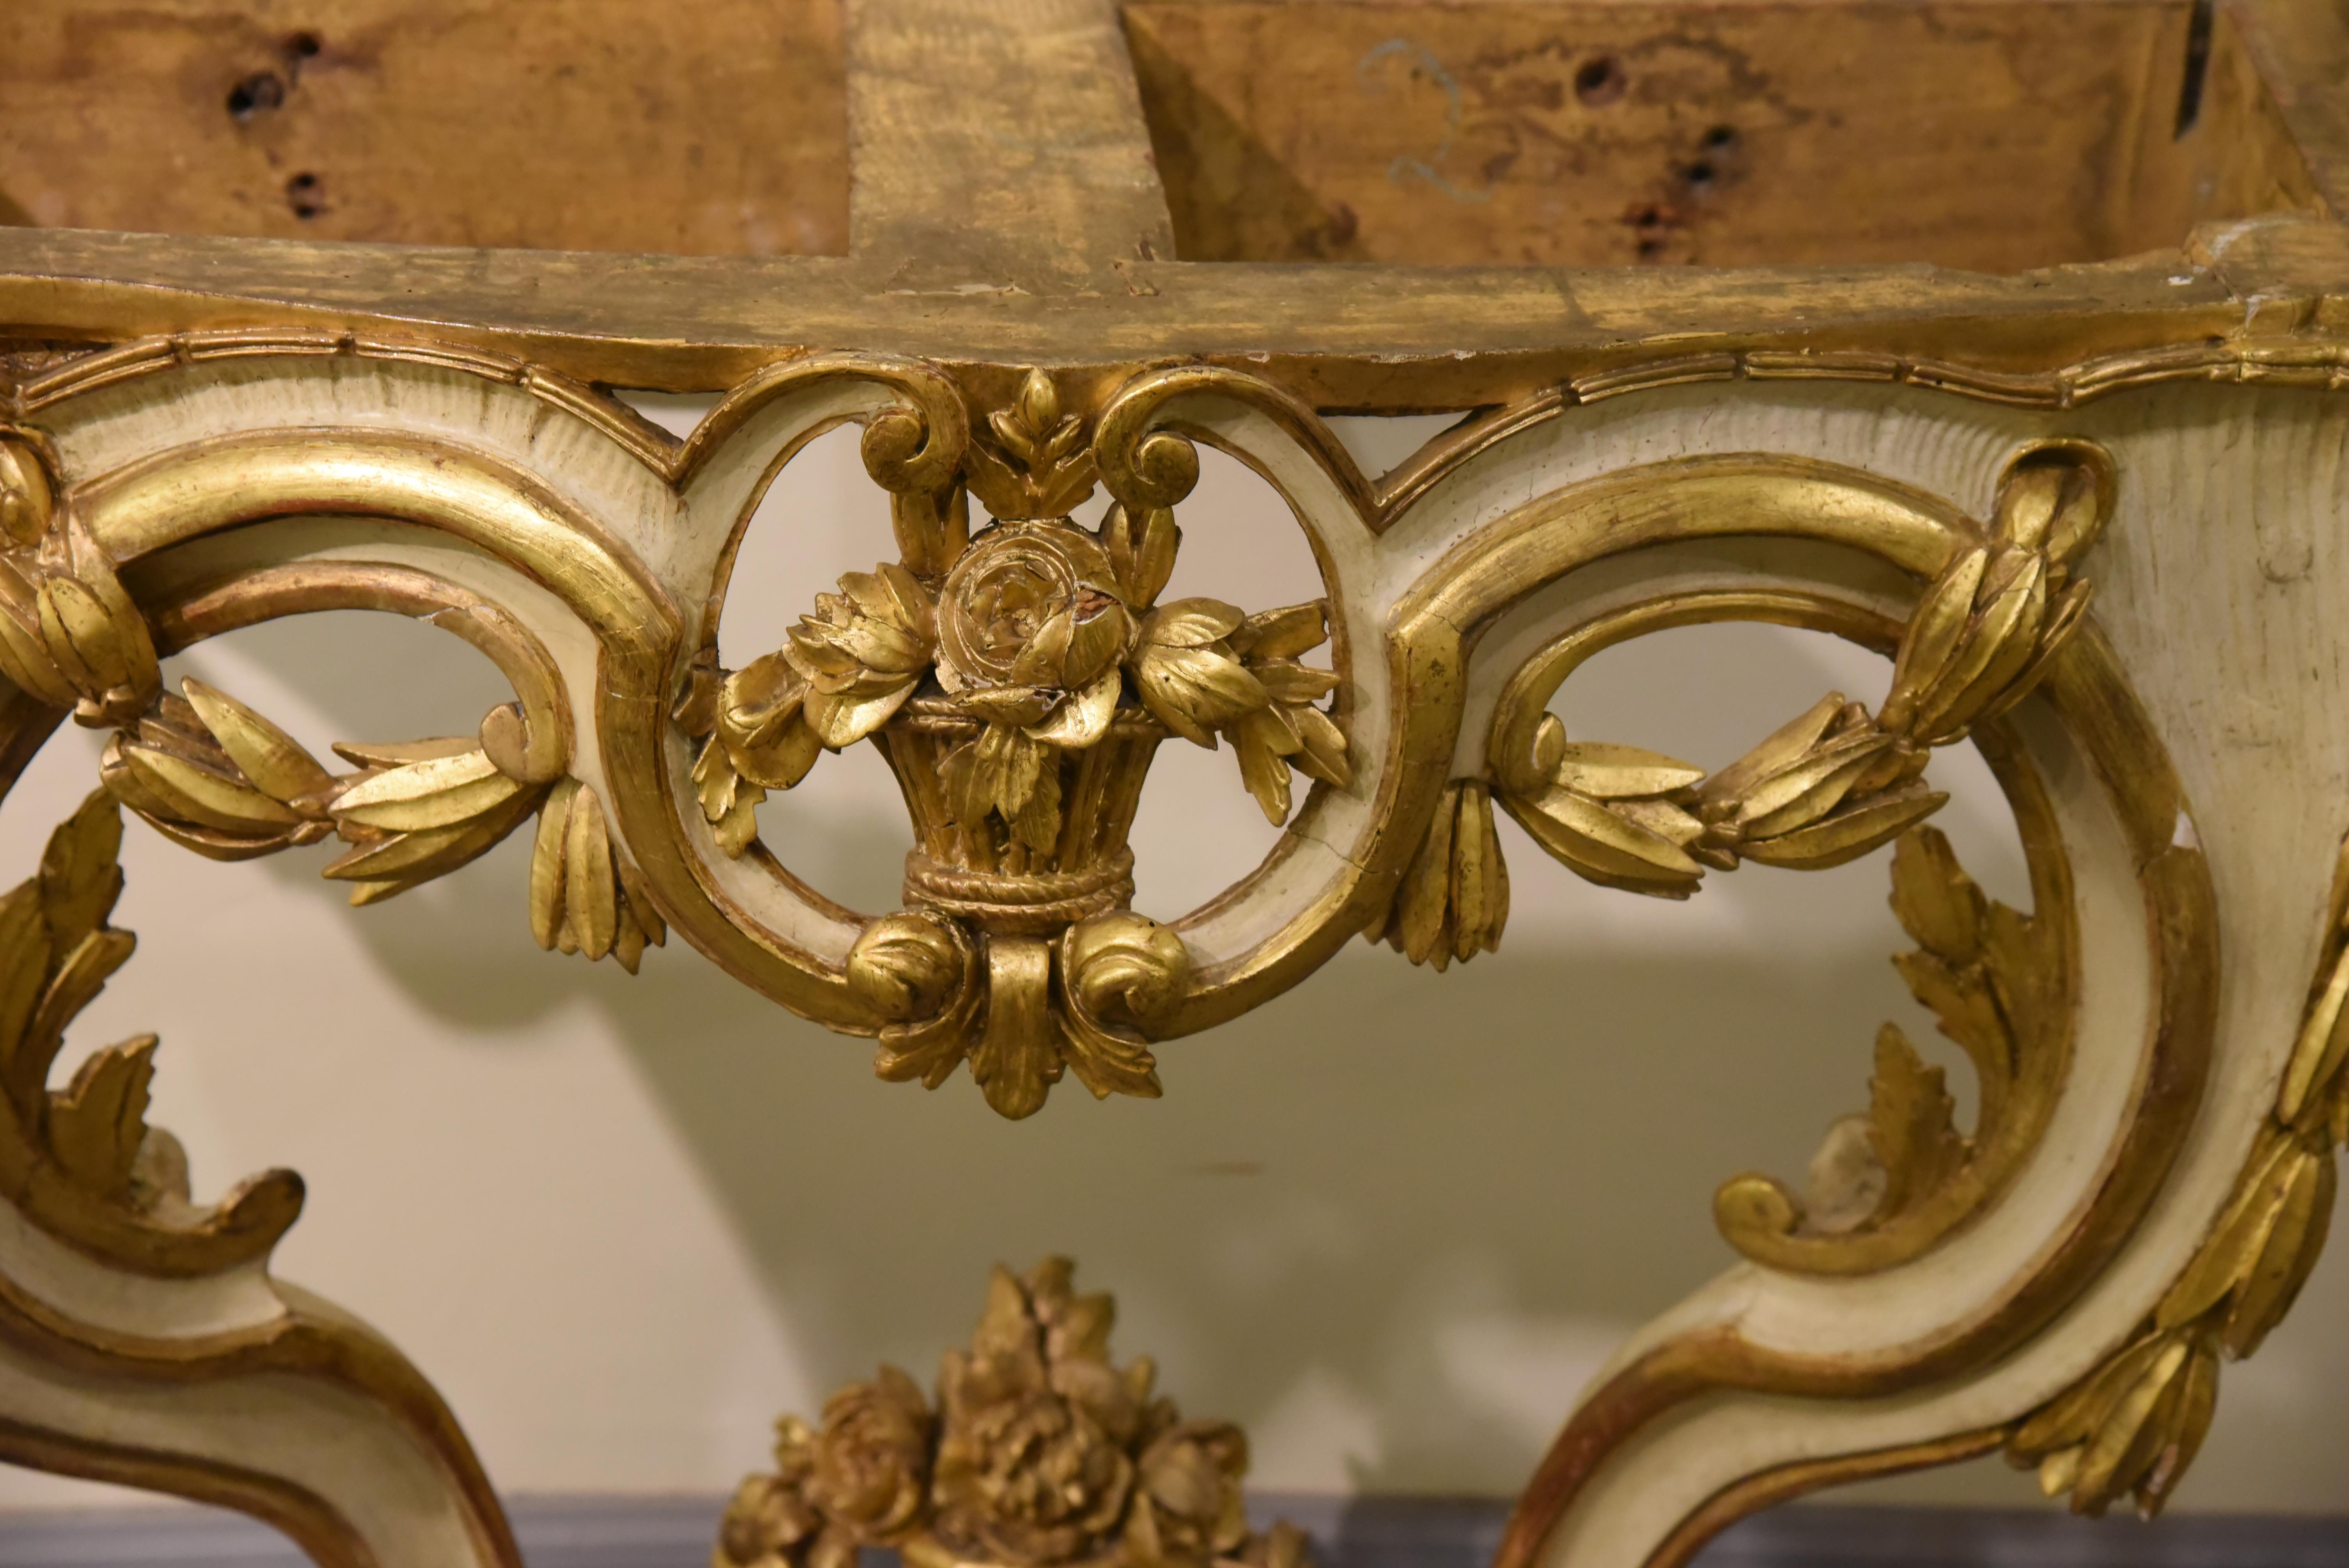 Console 18th century, Louis XV Style , richly Sculpted by hand with Floral motifs, Gold Leaf Gilding, Ivory Lacquered, Pyrenees Marble, Mid 1700s.